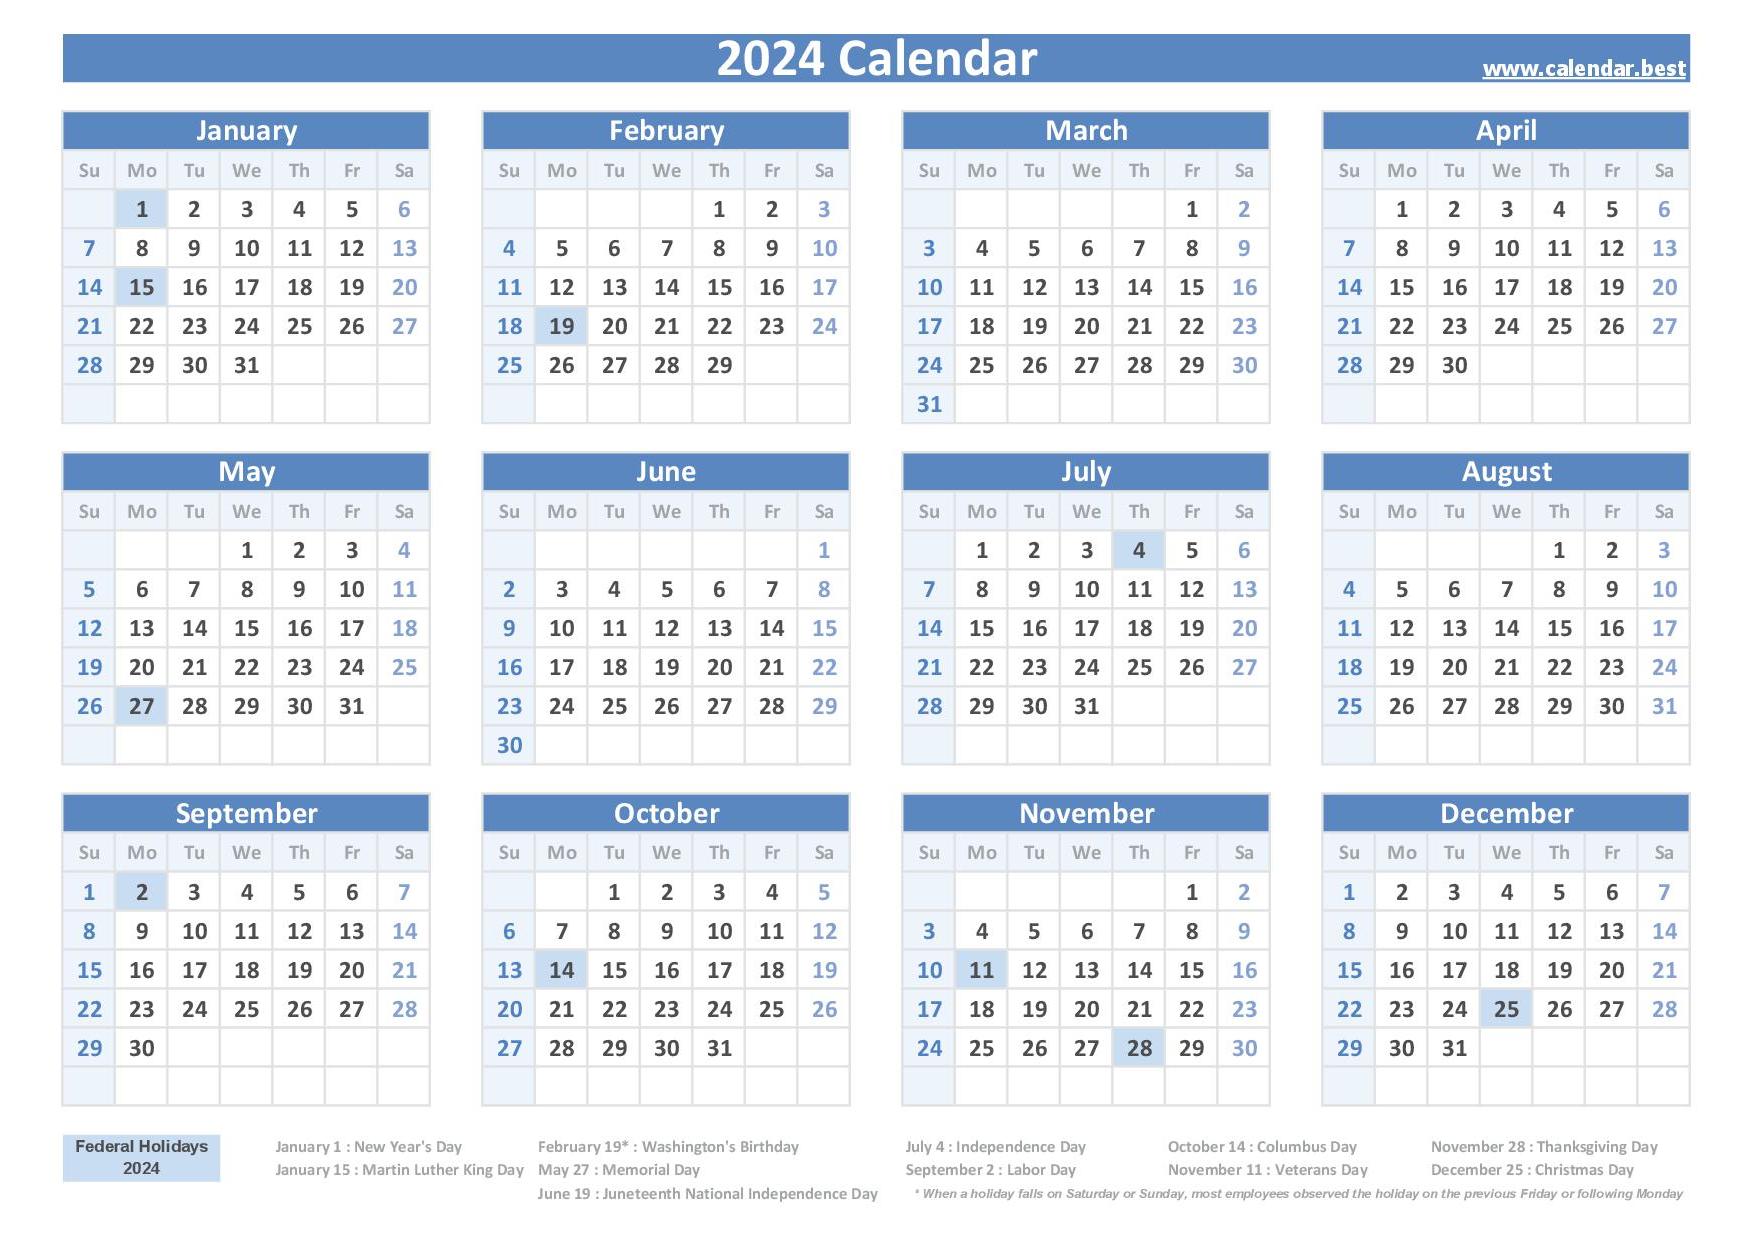 2024 Federal Holidays : list and 2024 calendar with holidays to print